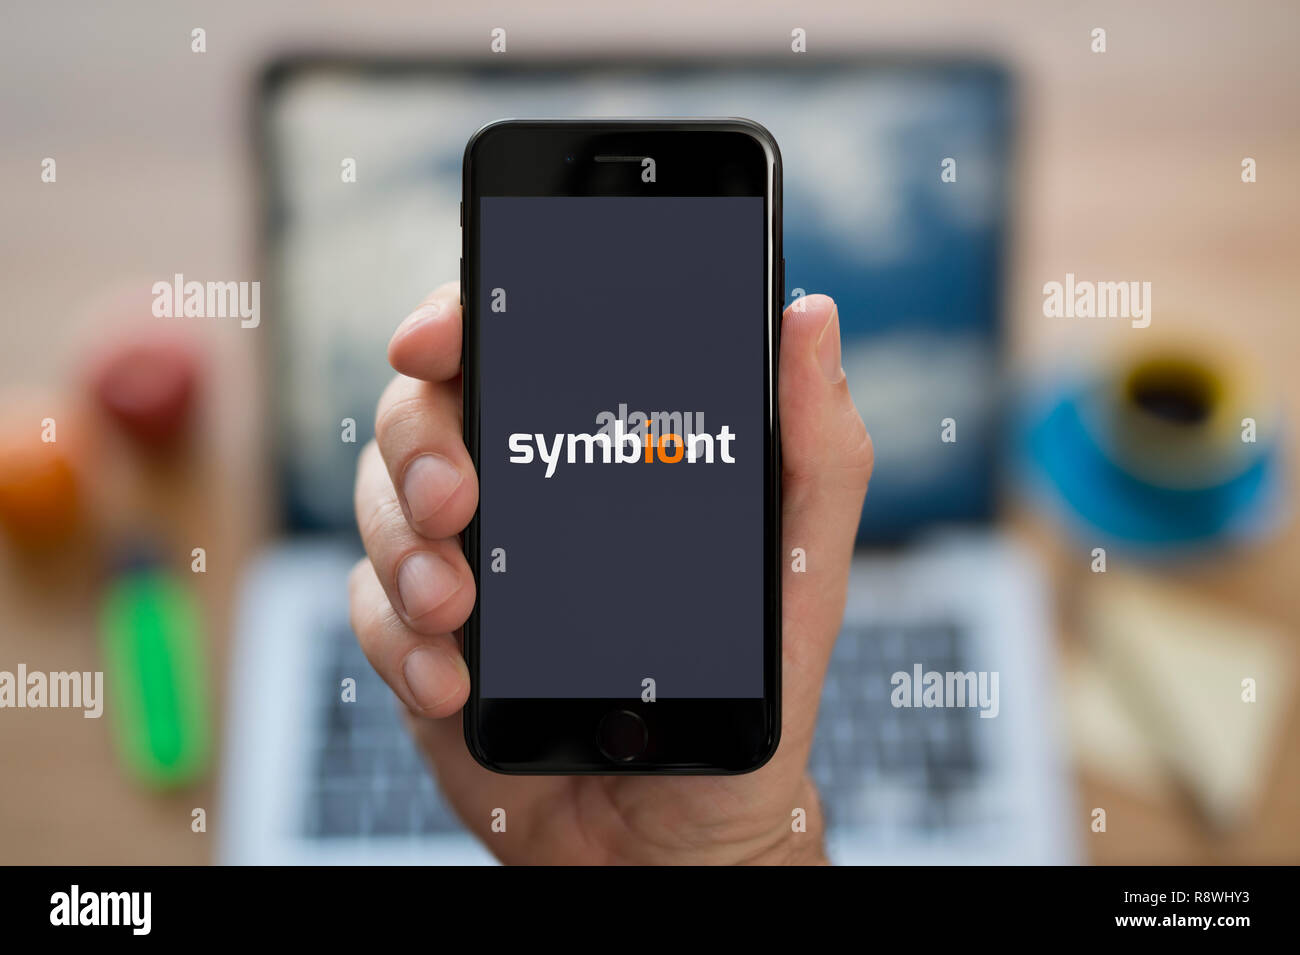 A man looks at his iPhone which displays the Symbiont logo (Editorial use only). Stock Photo